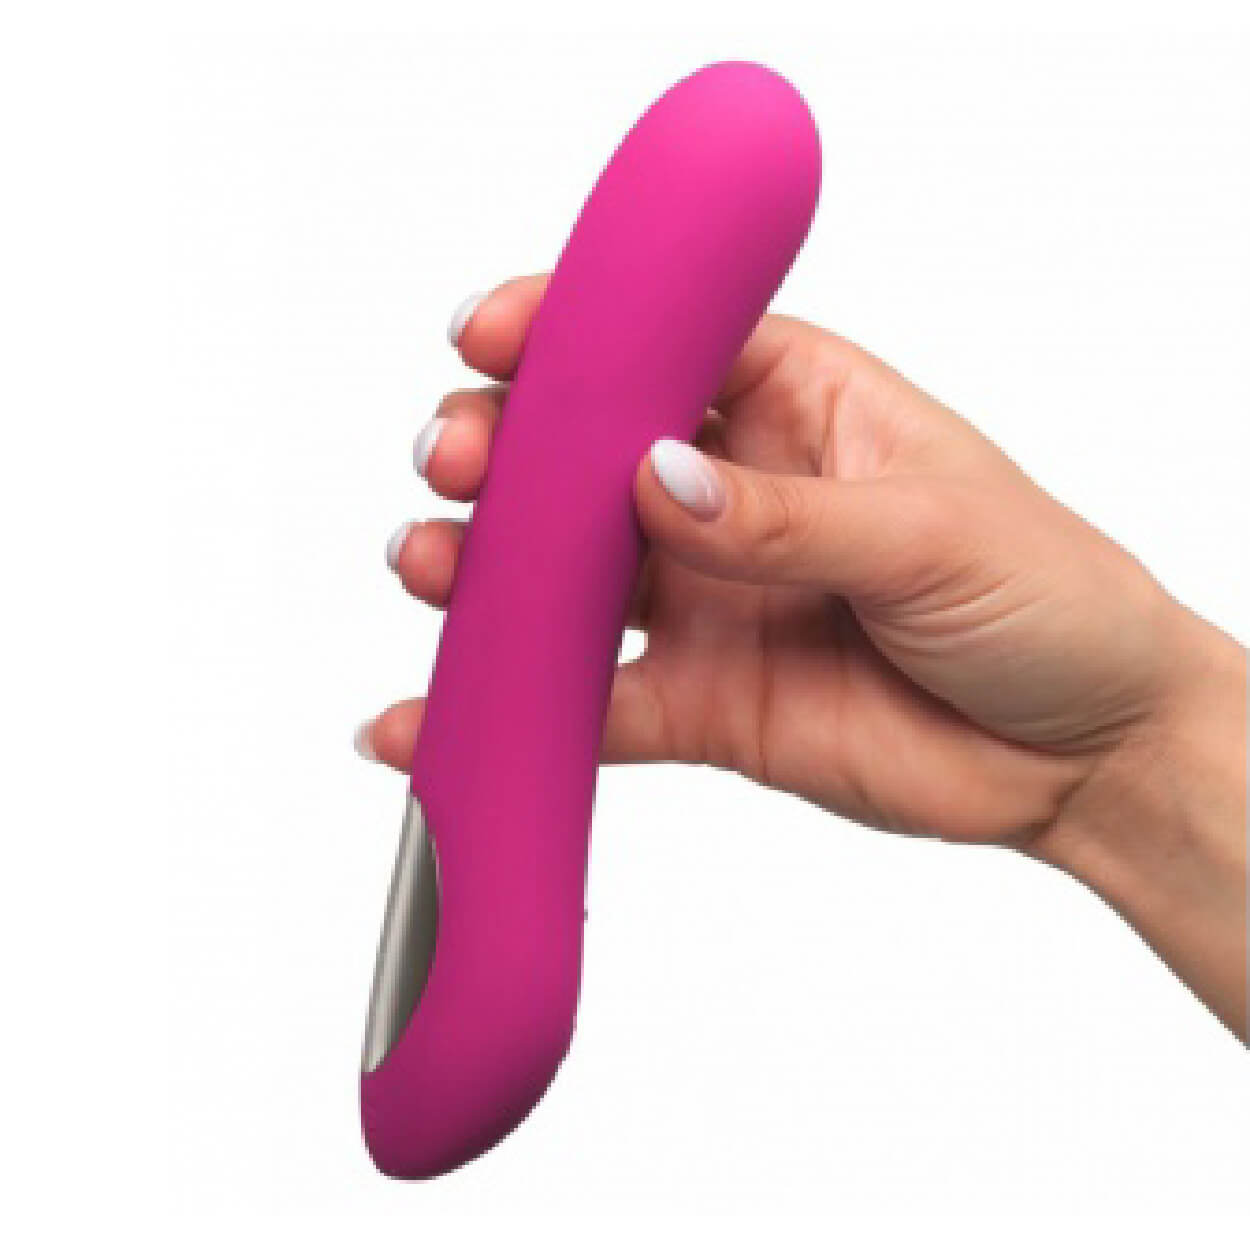 The vibrator to hit the right spots Pearl 2 by Kiiroo - Product image